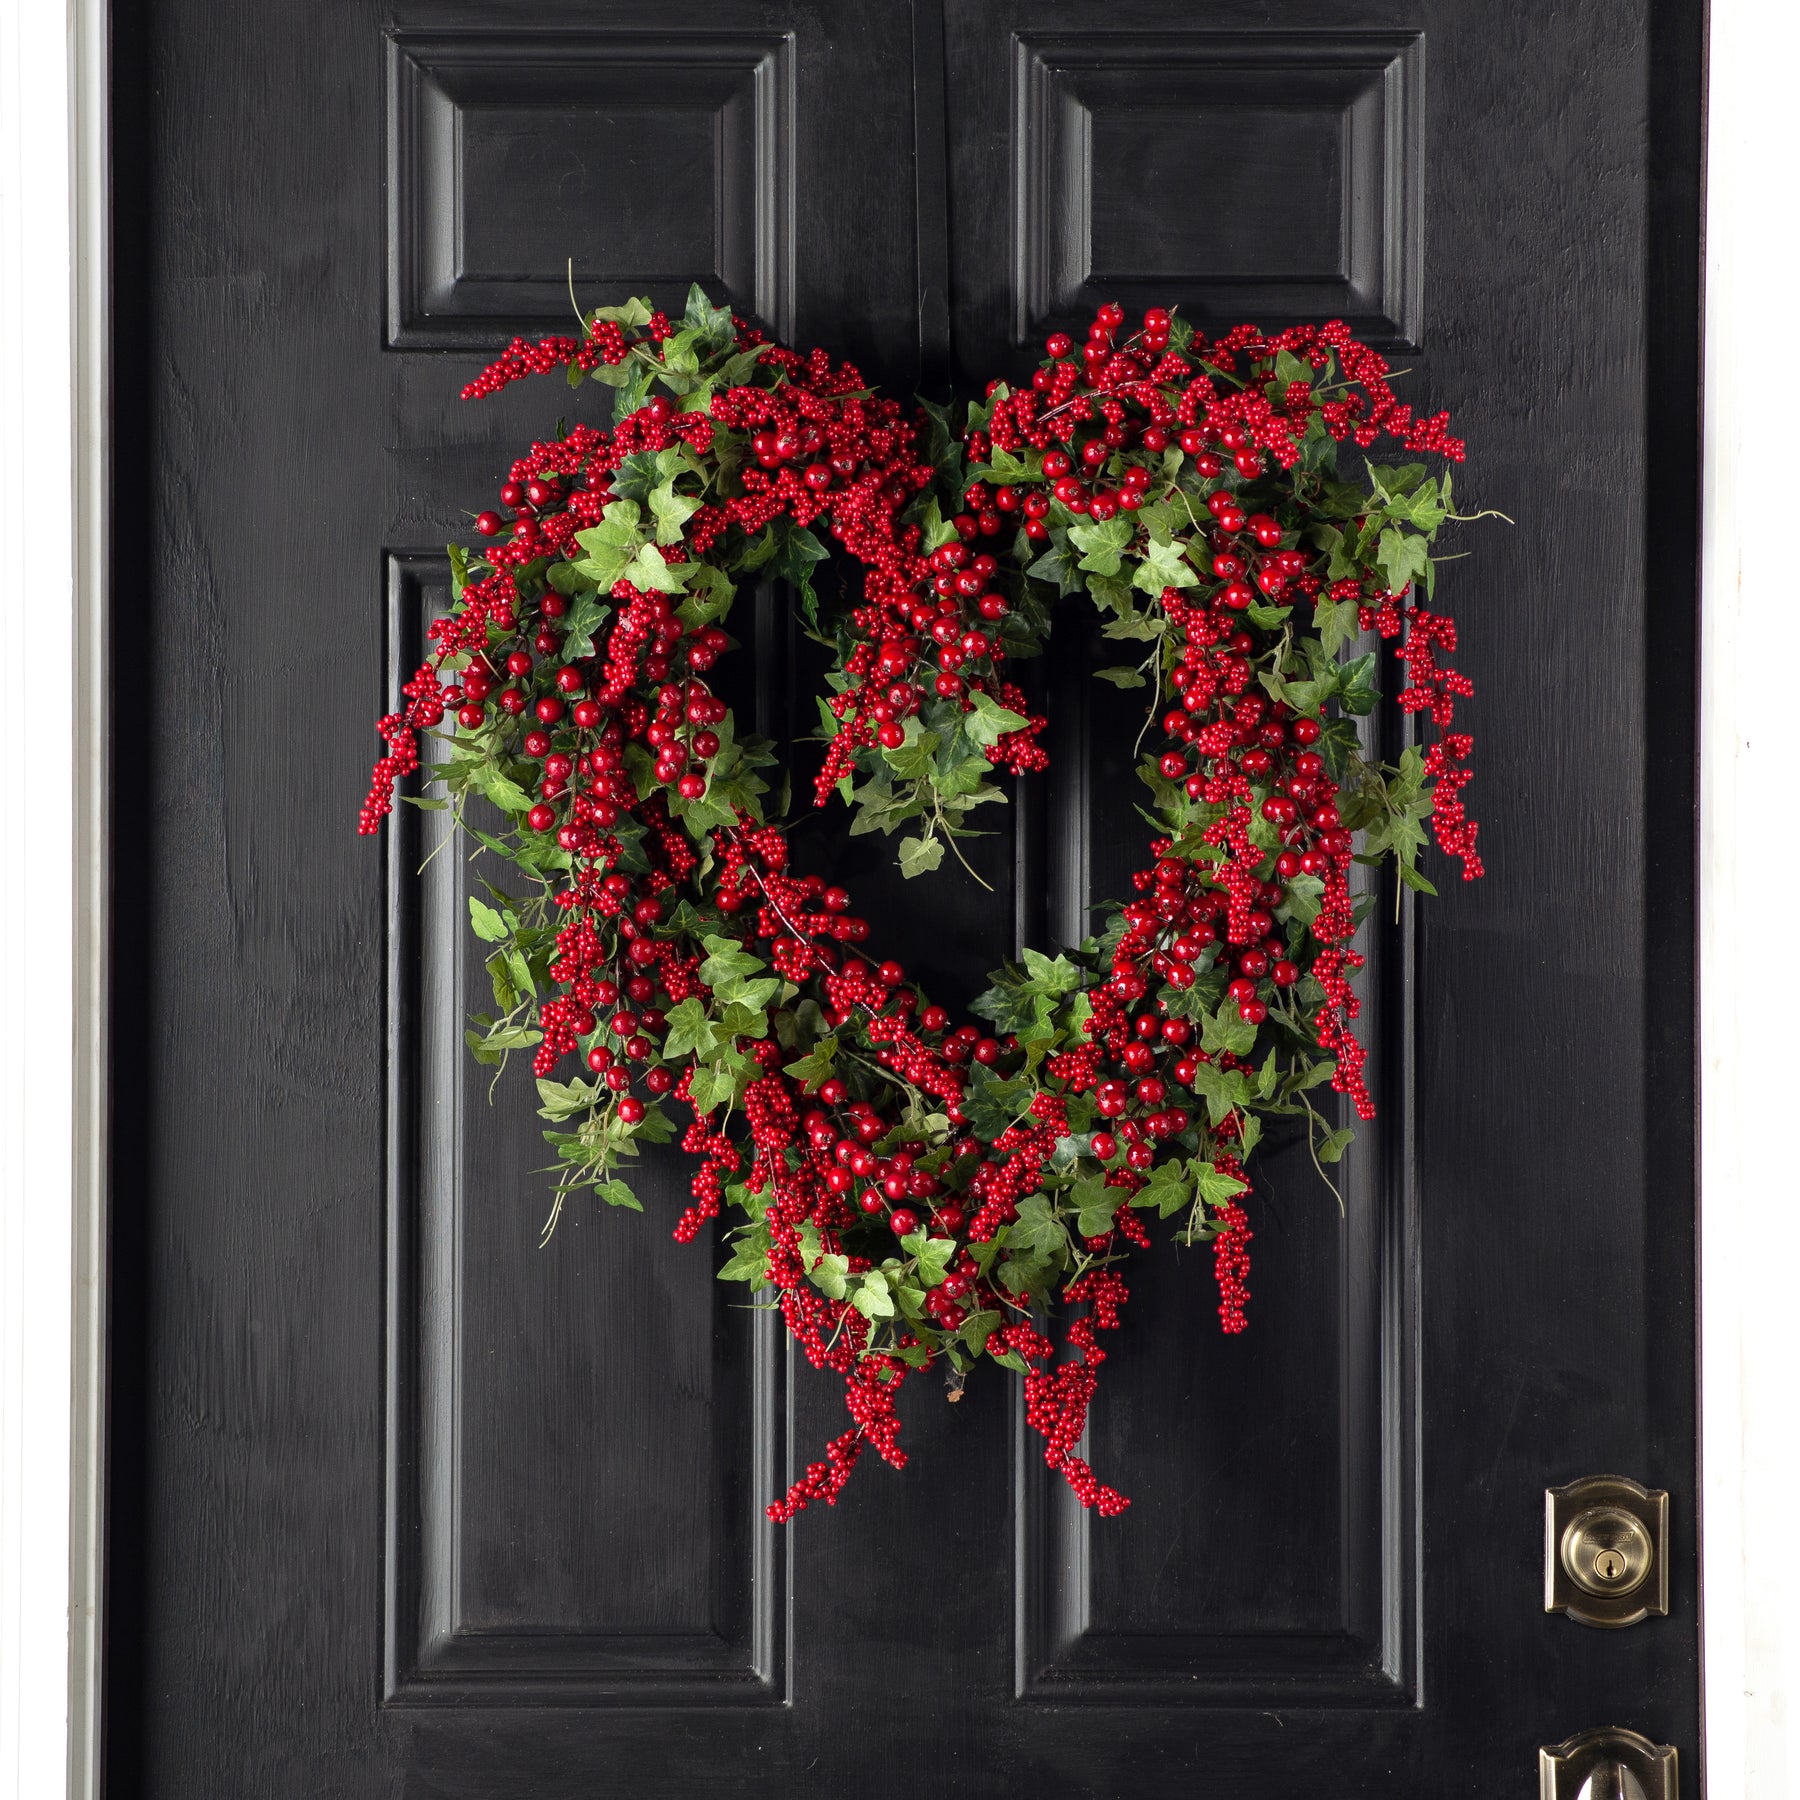 Red Rose, White Dogwood & Ivy Valentine's Heart Wreath – Darby Creek Trading